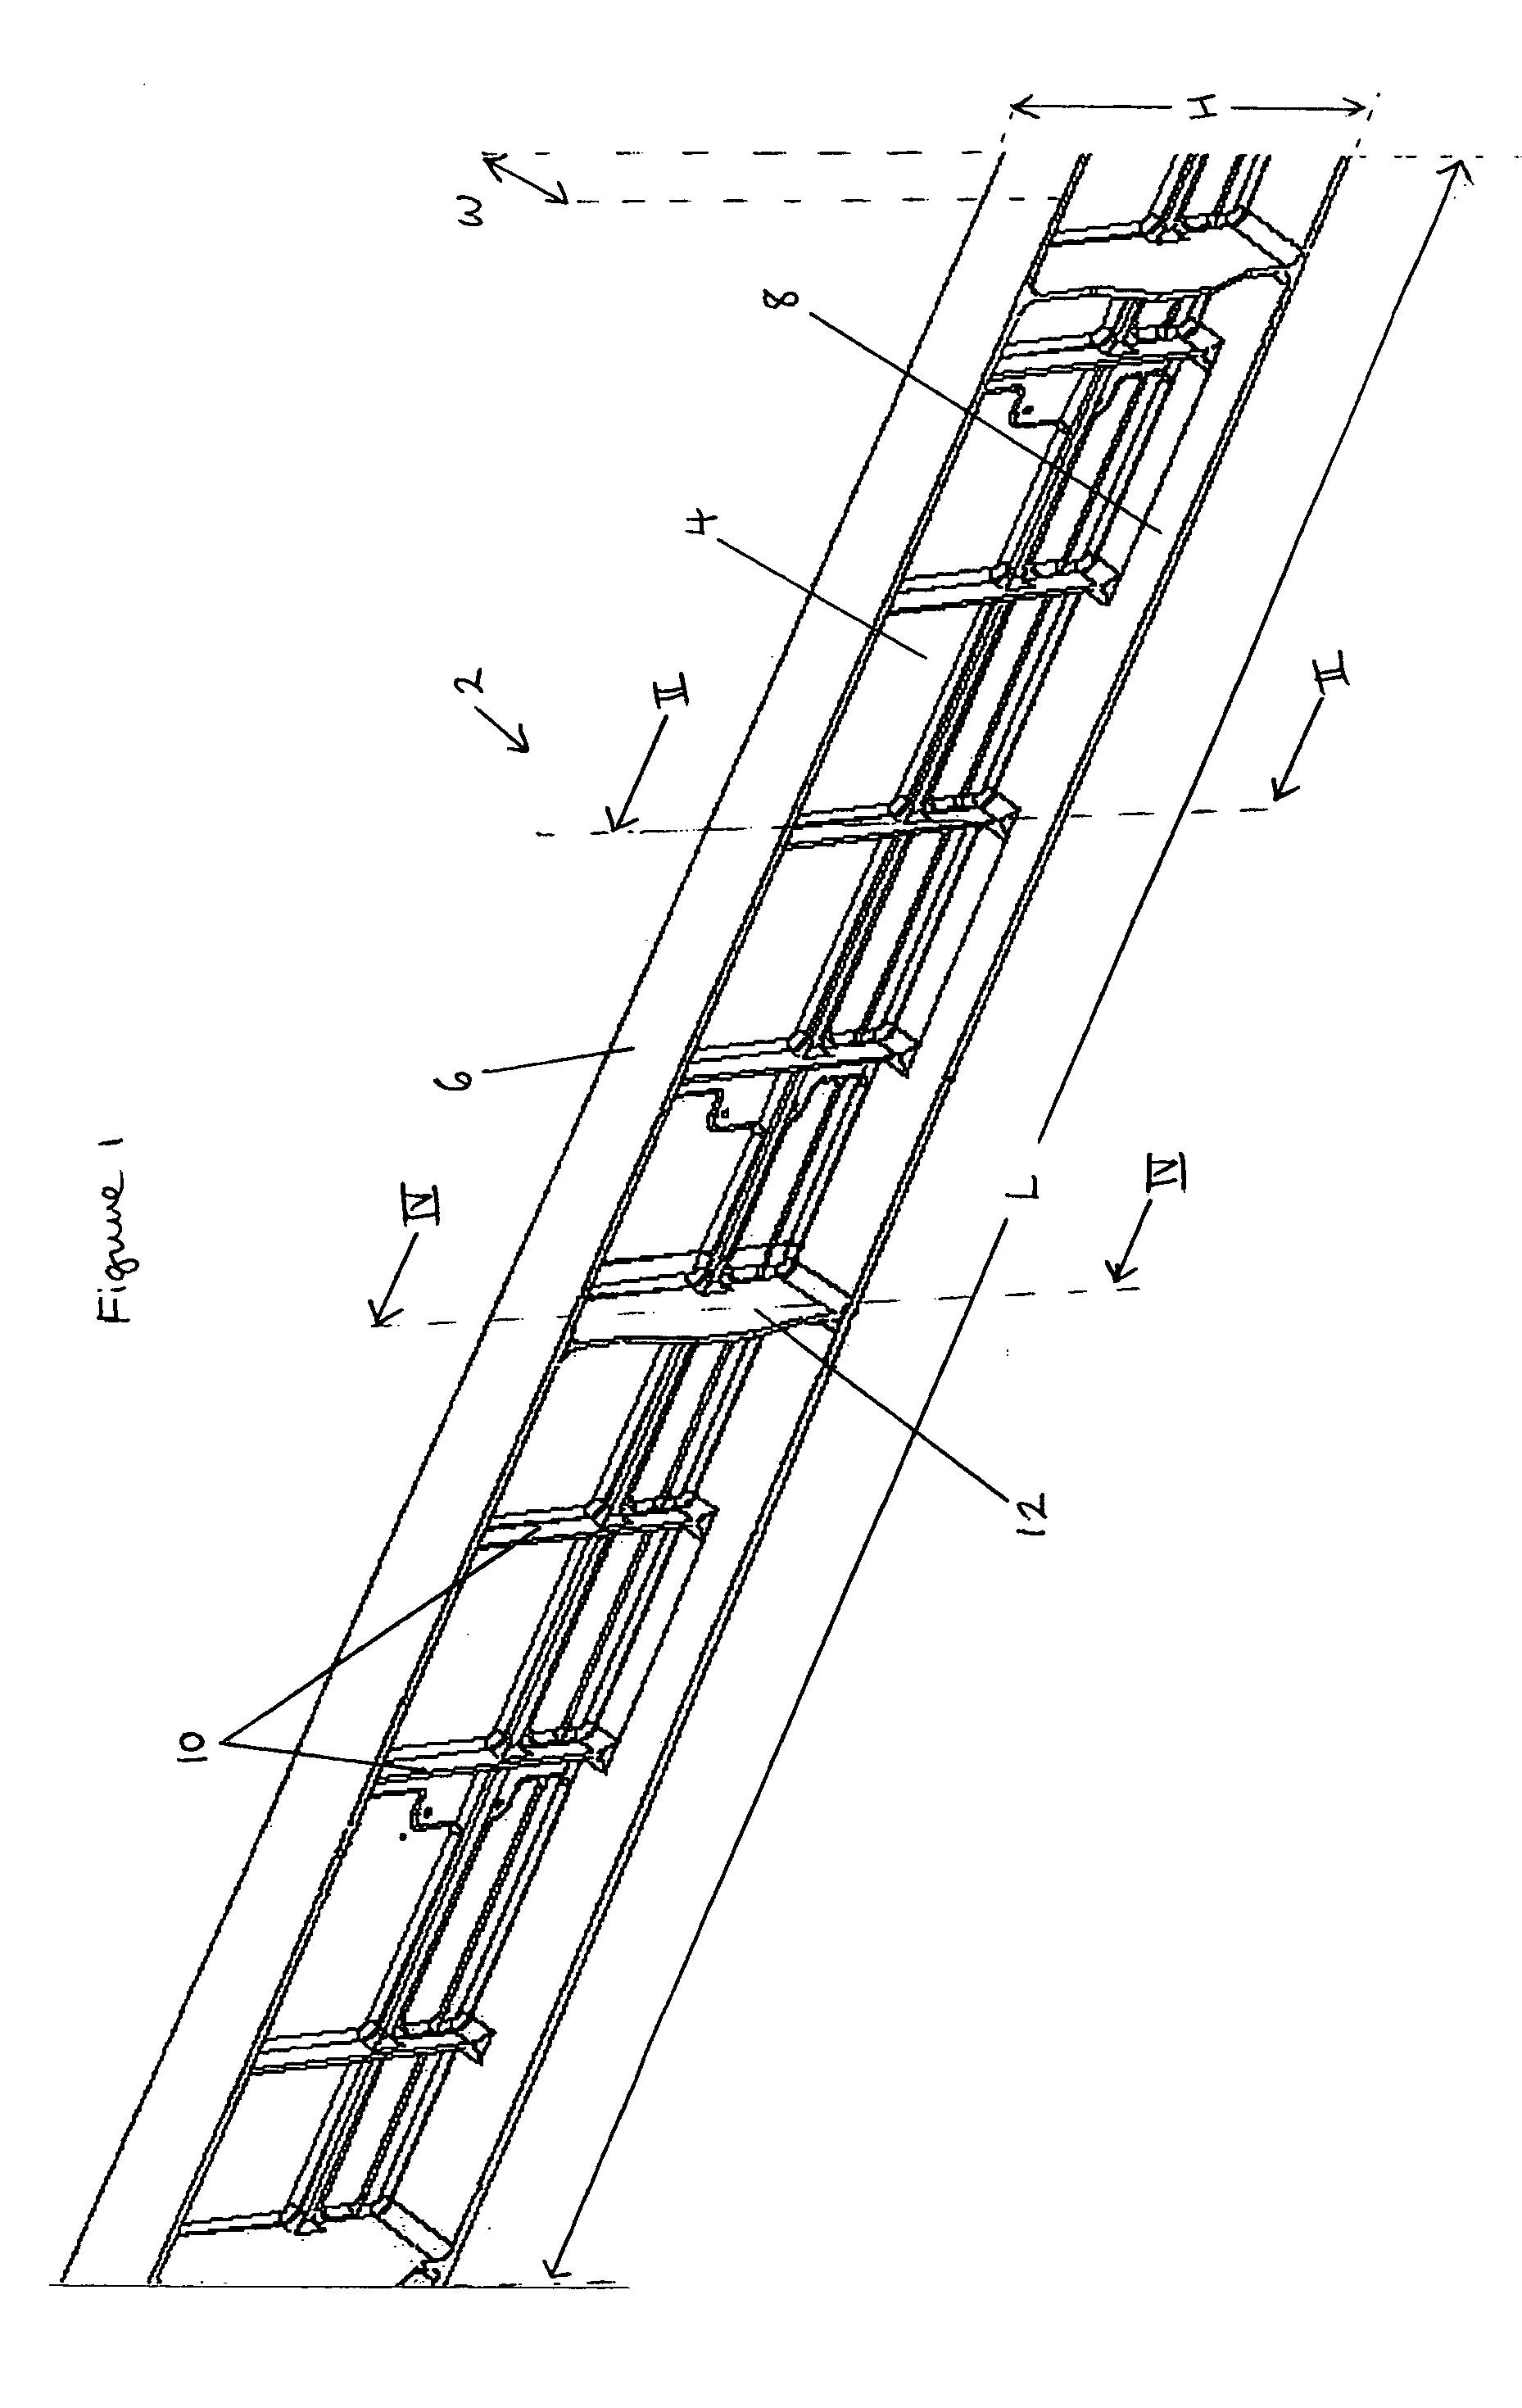 Welding process for large structures